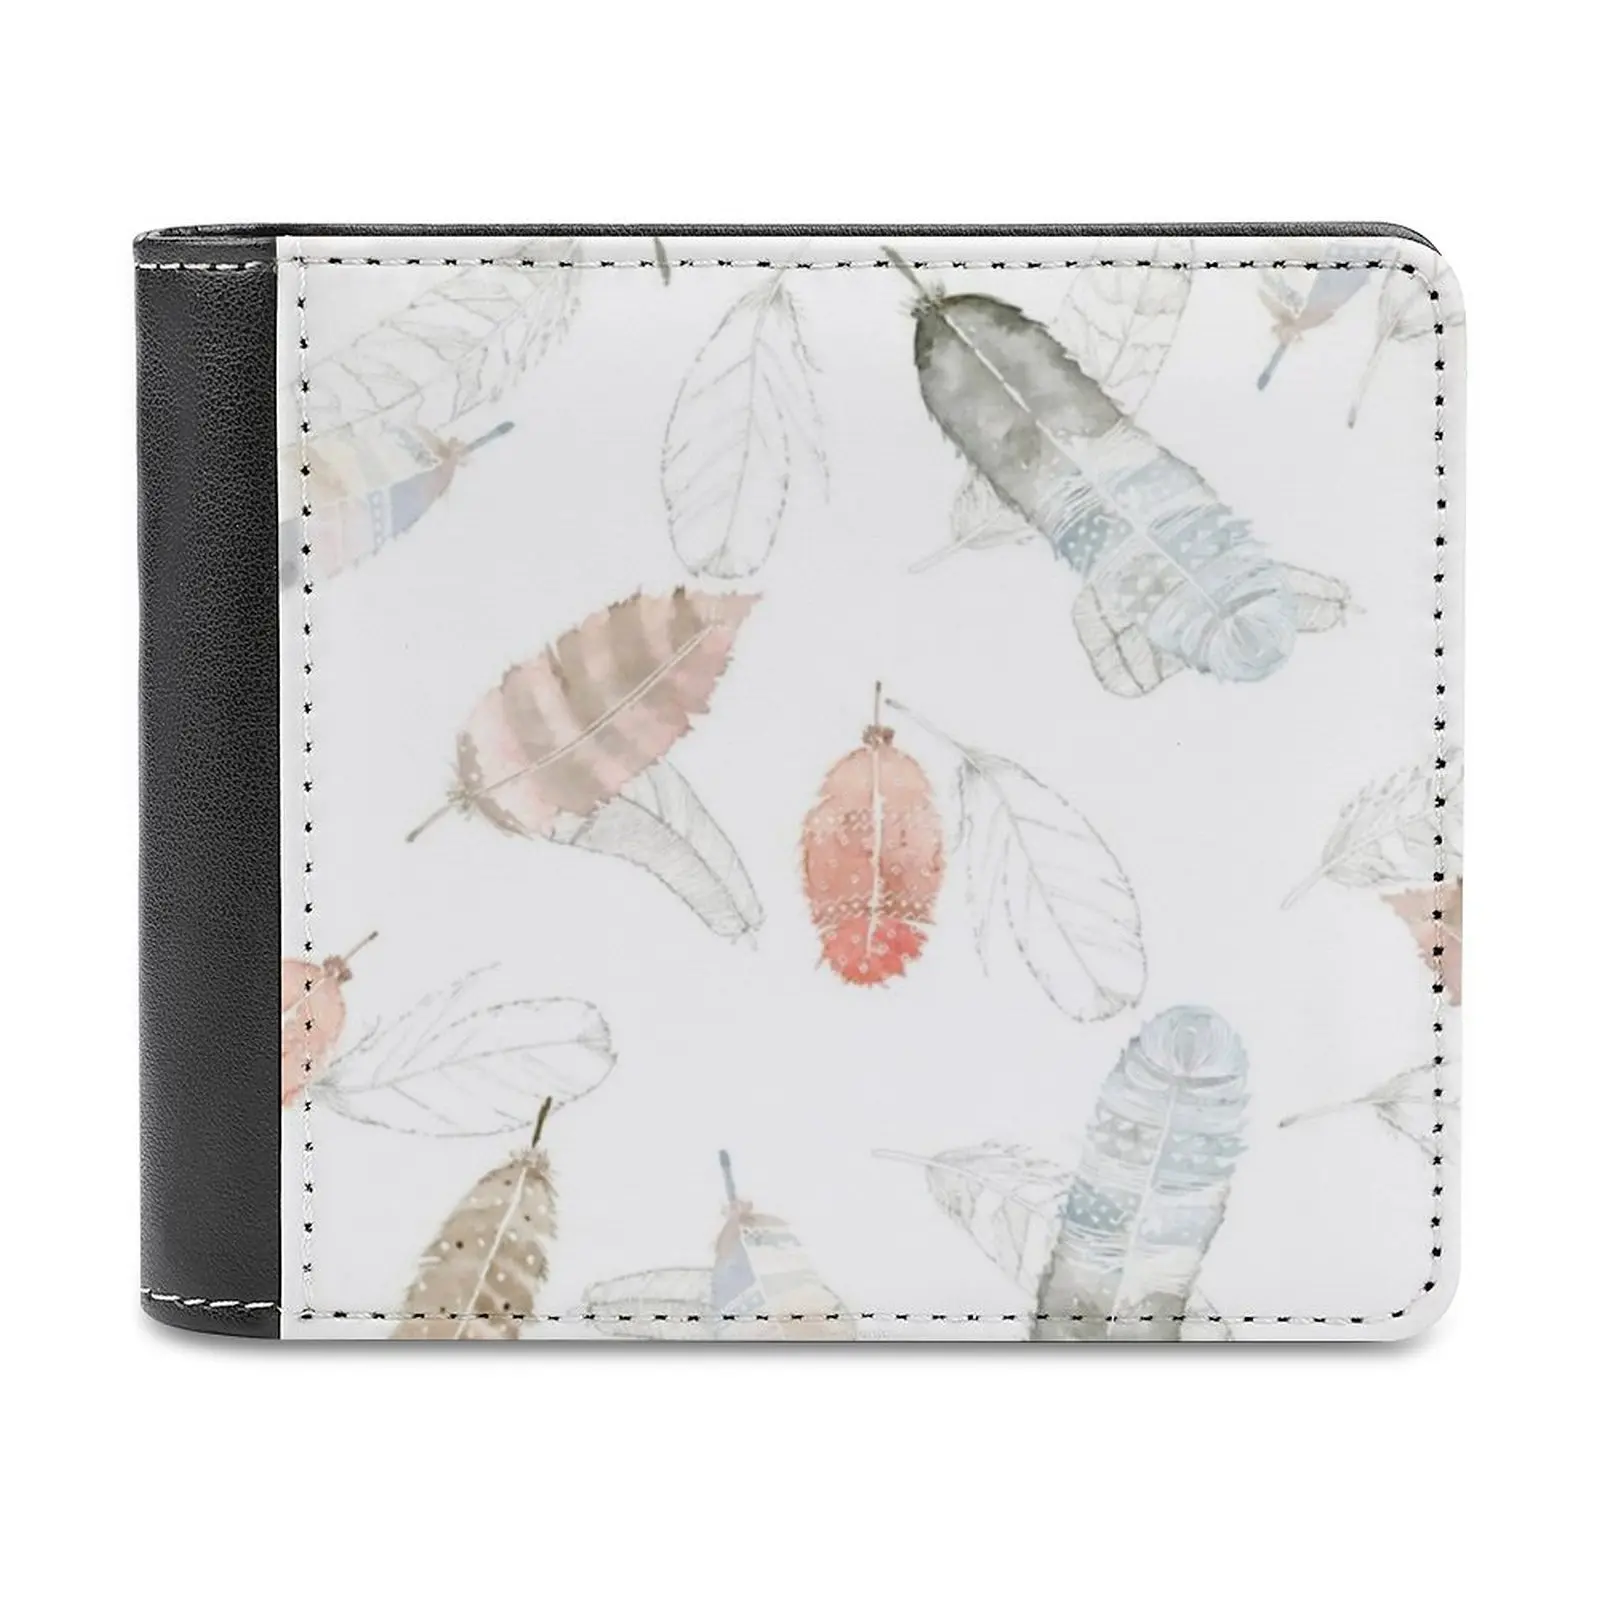 

Flighty Feathers With Colors Leather Wallet Credit Card Holder Luxury Wallet Pattern Feathers Mod Minimalist Tribal Nature